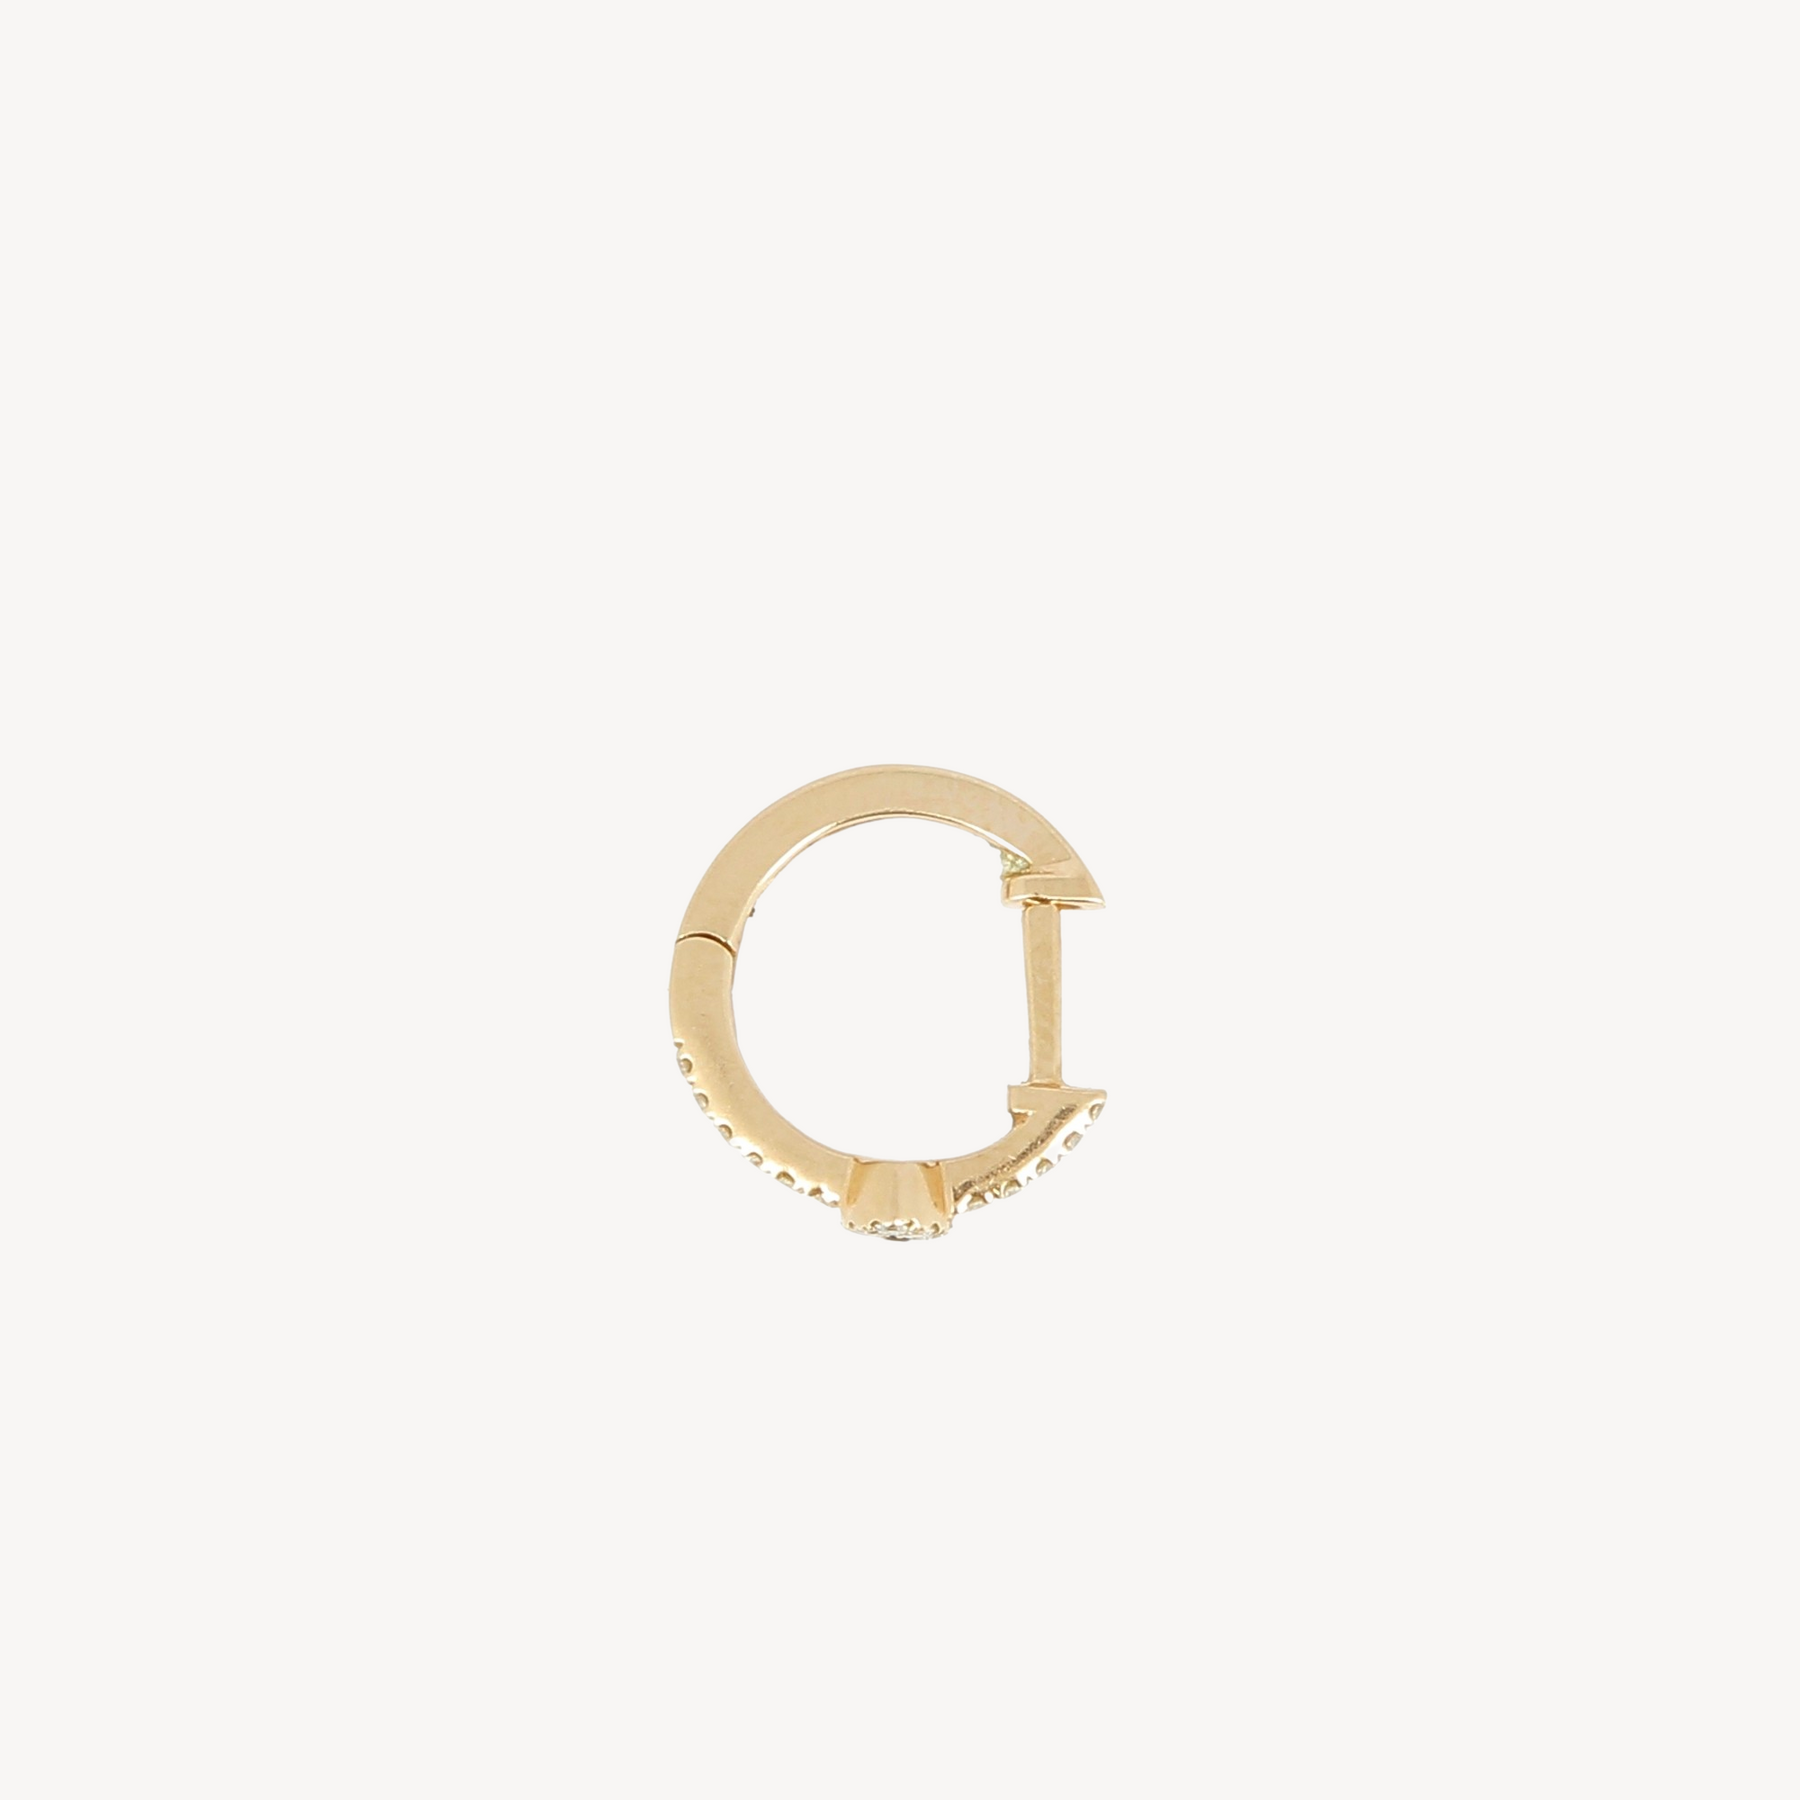 Pave diamond hoop with eye rose gold